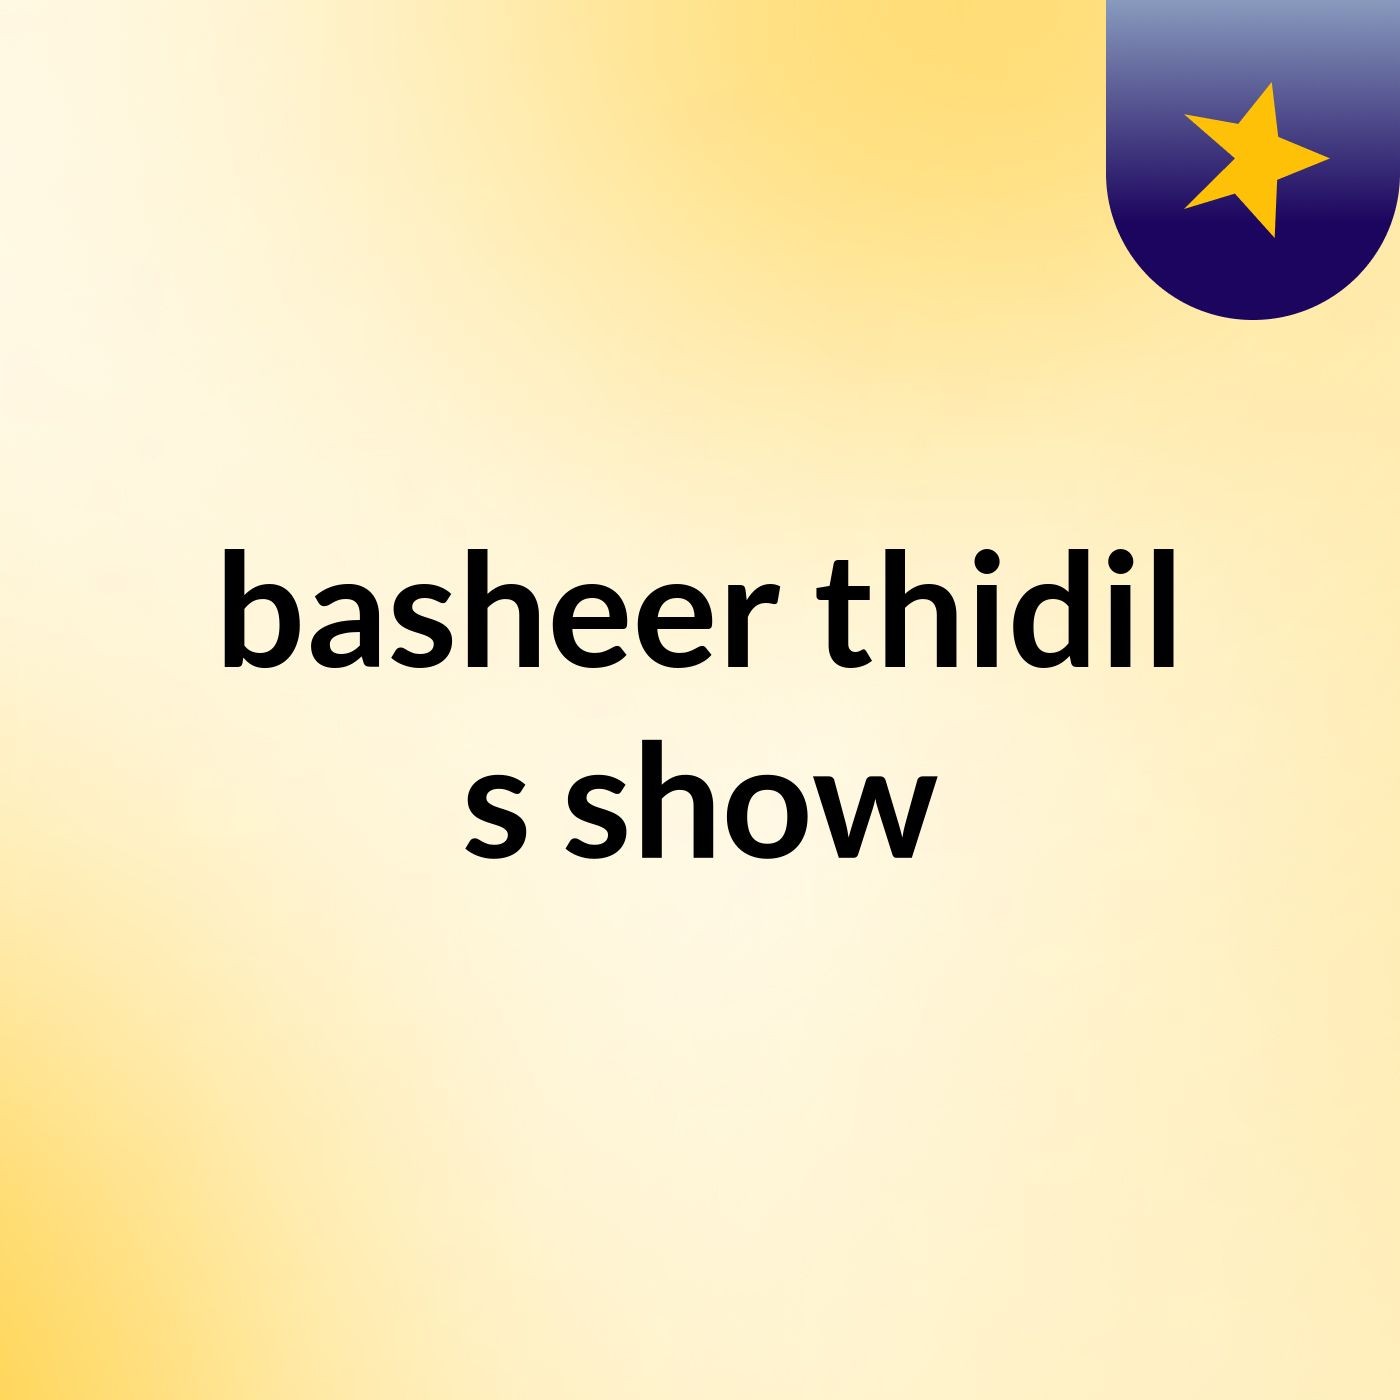 Episode 2 - basheer thidil's show